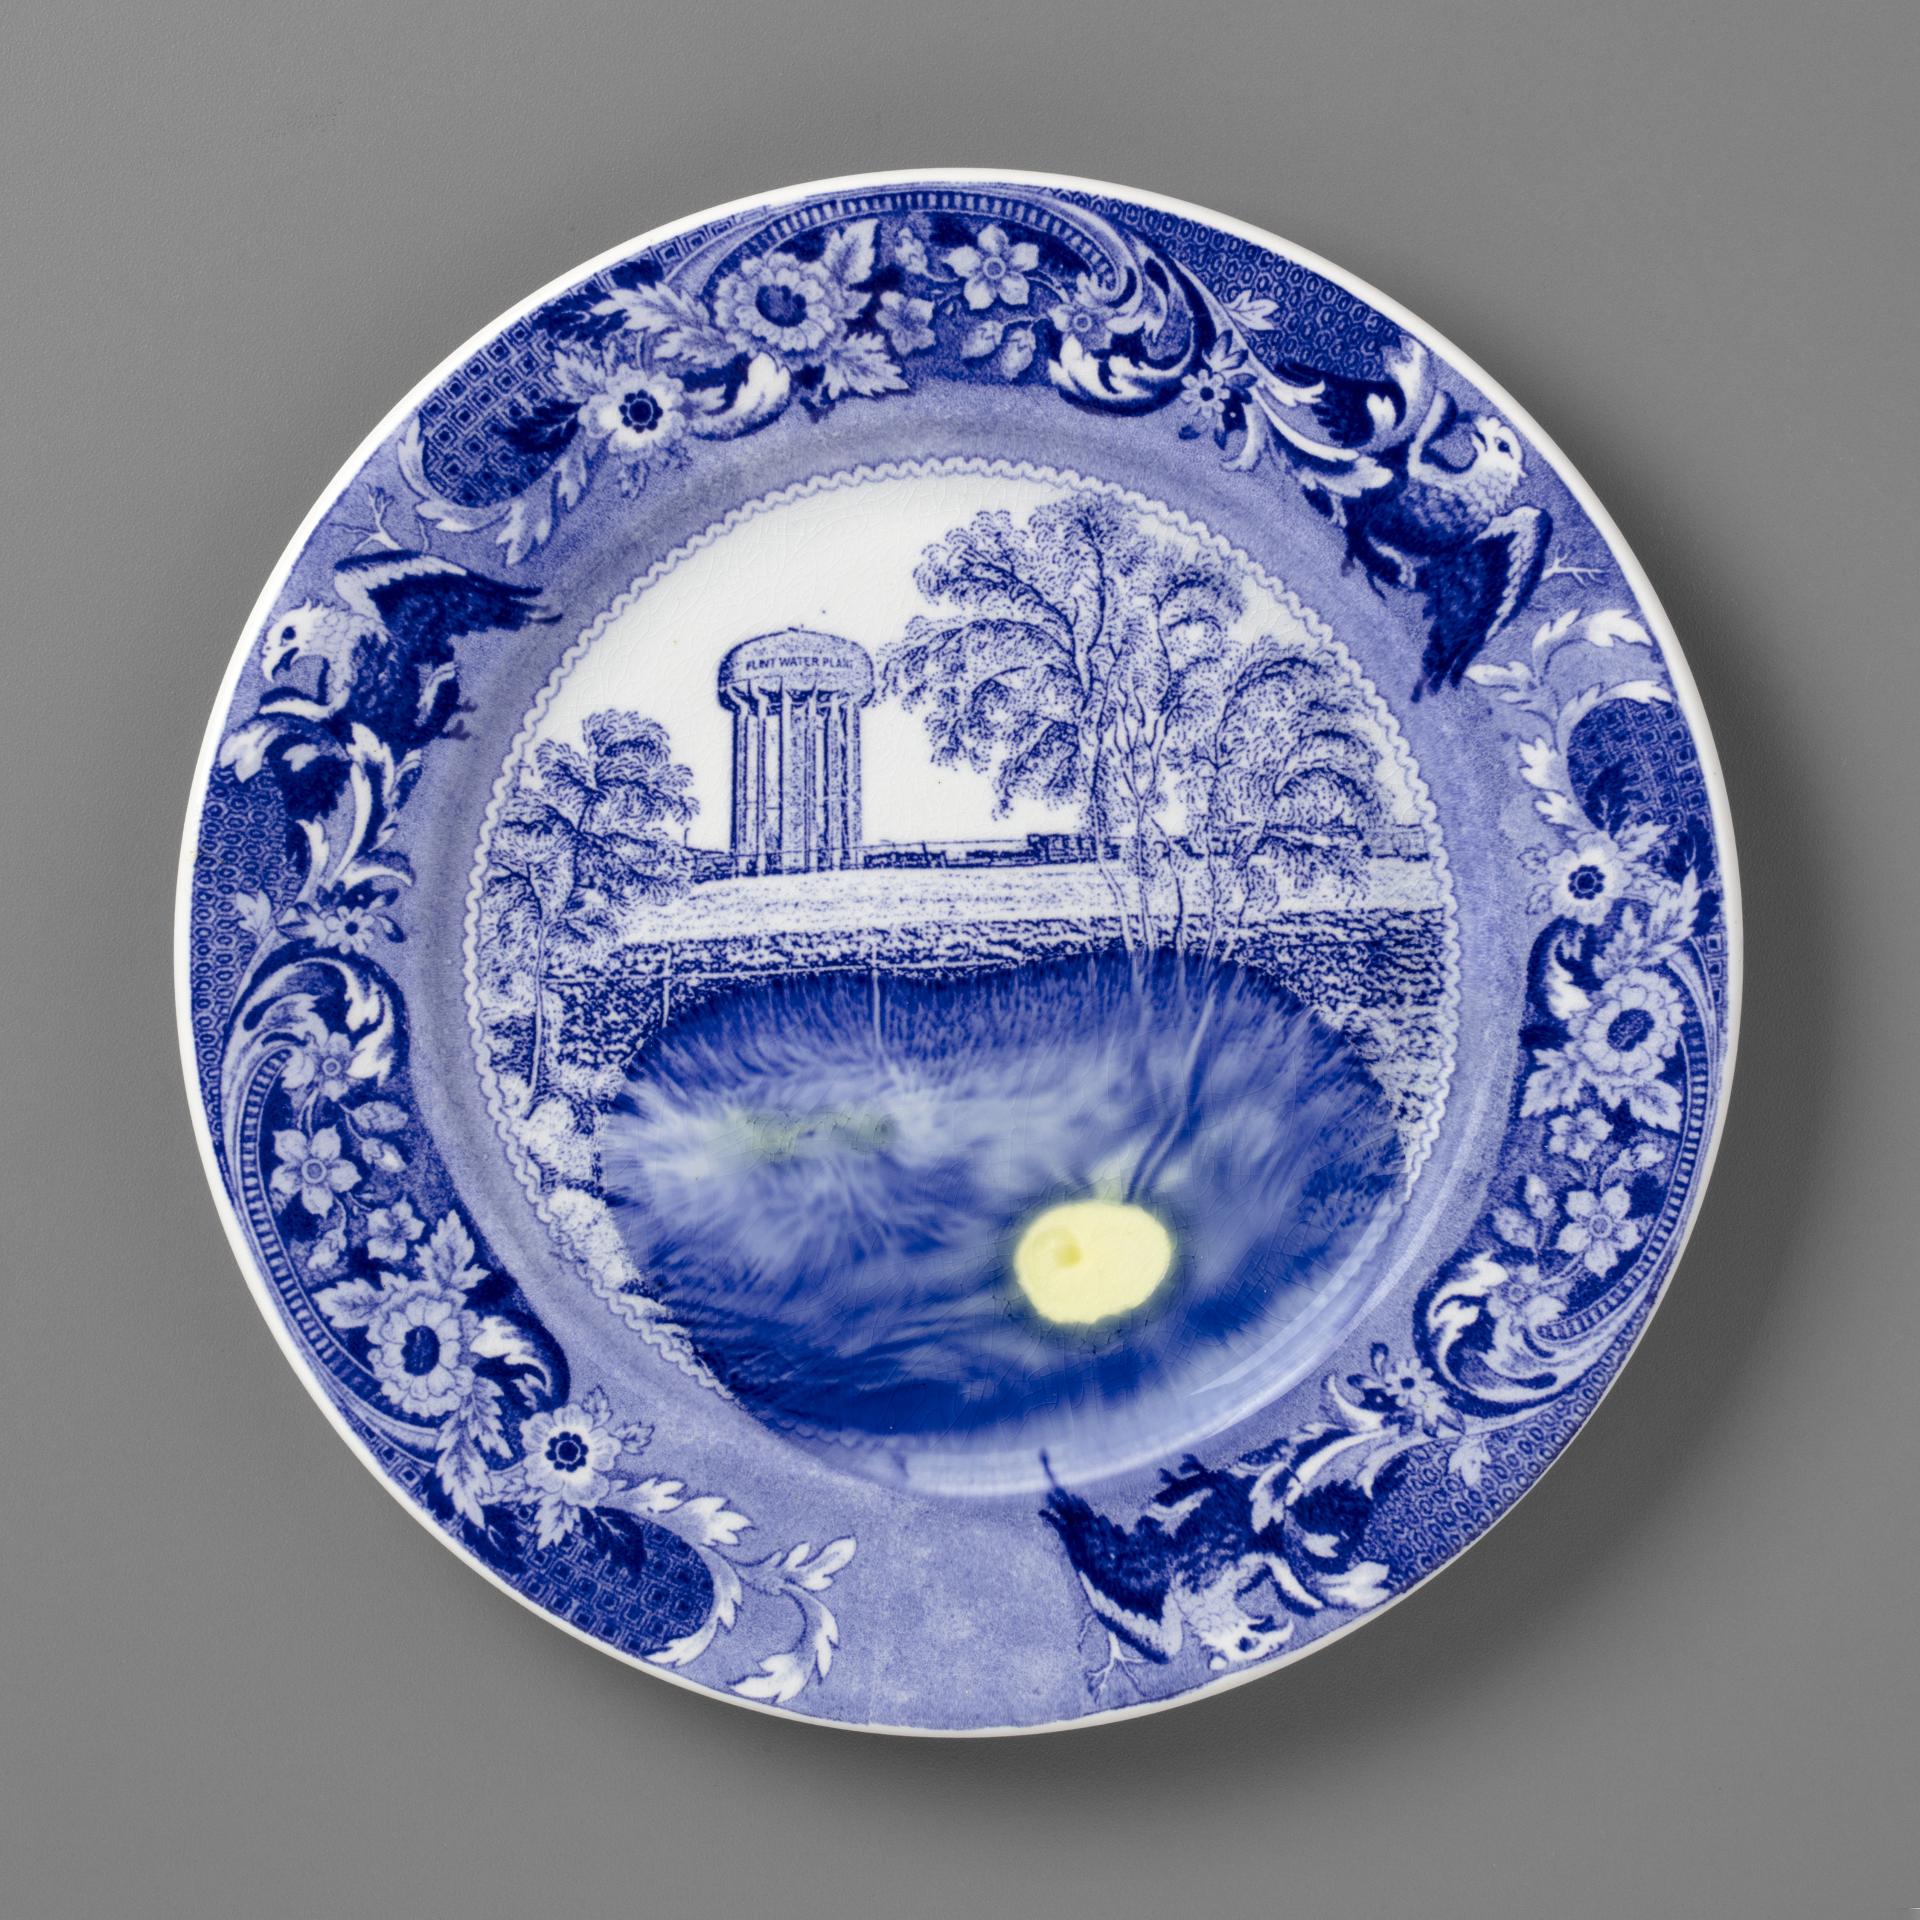 blue and white transferware plate depicting trees and a water tower labeled Flint, with lead melted onto the plate